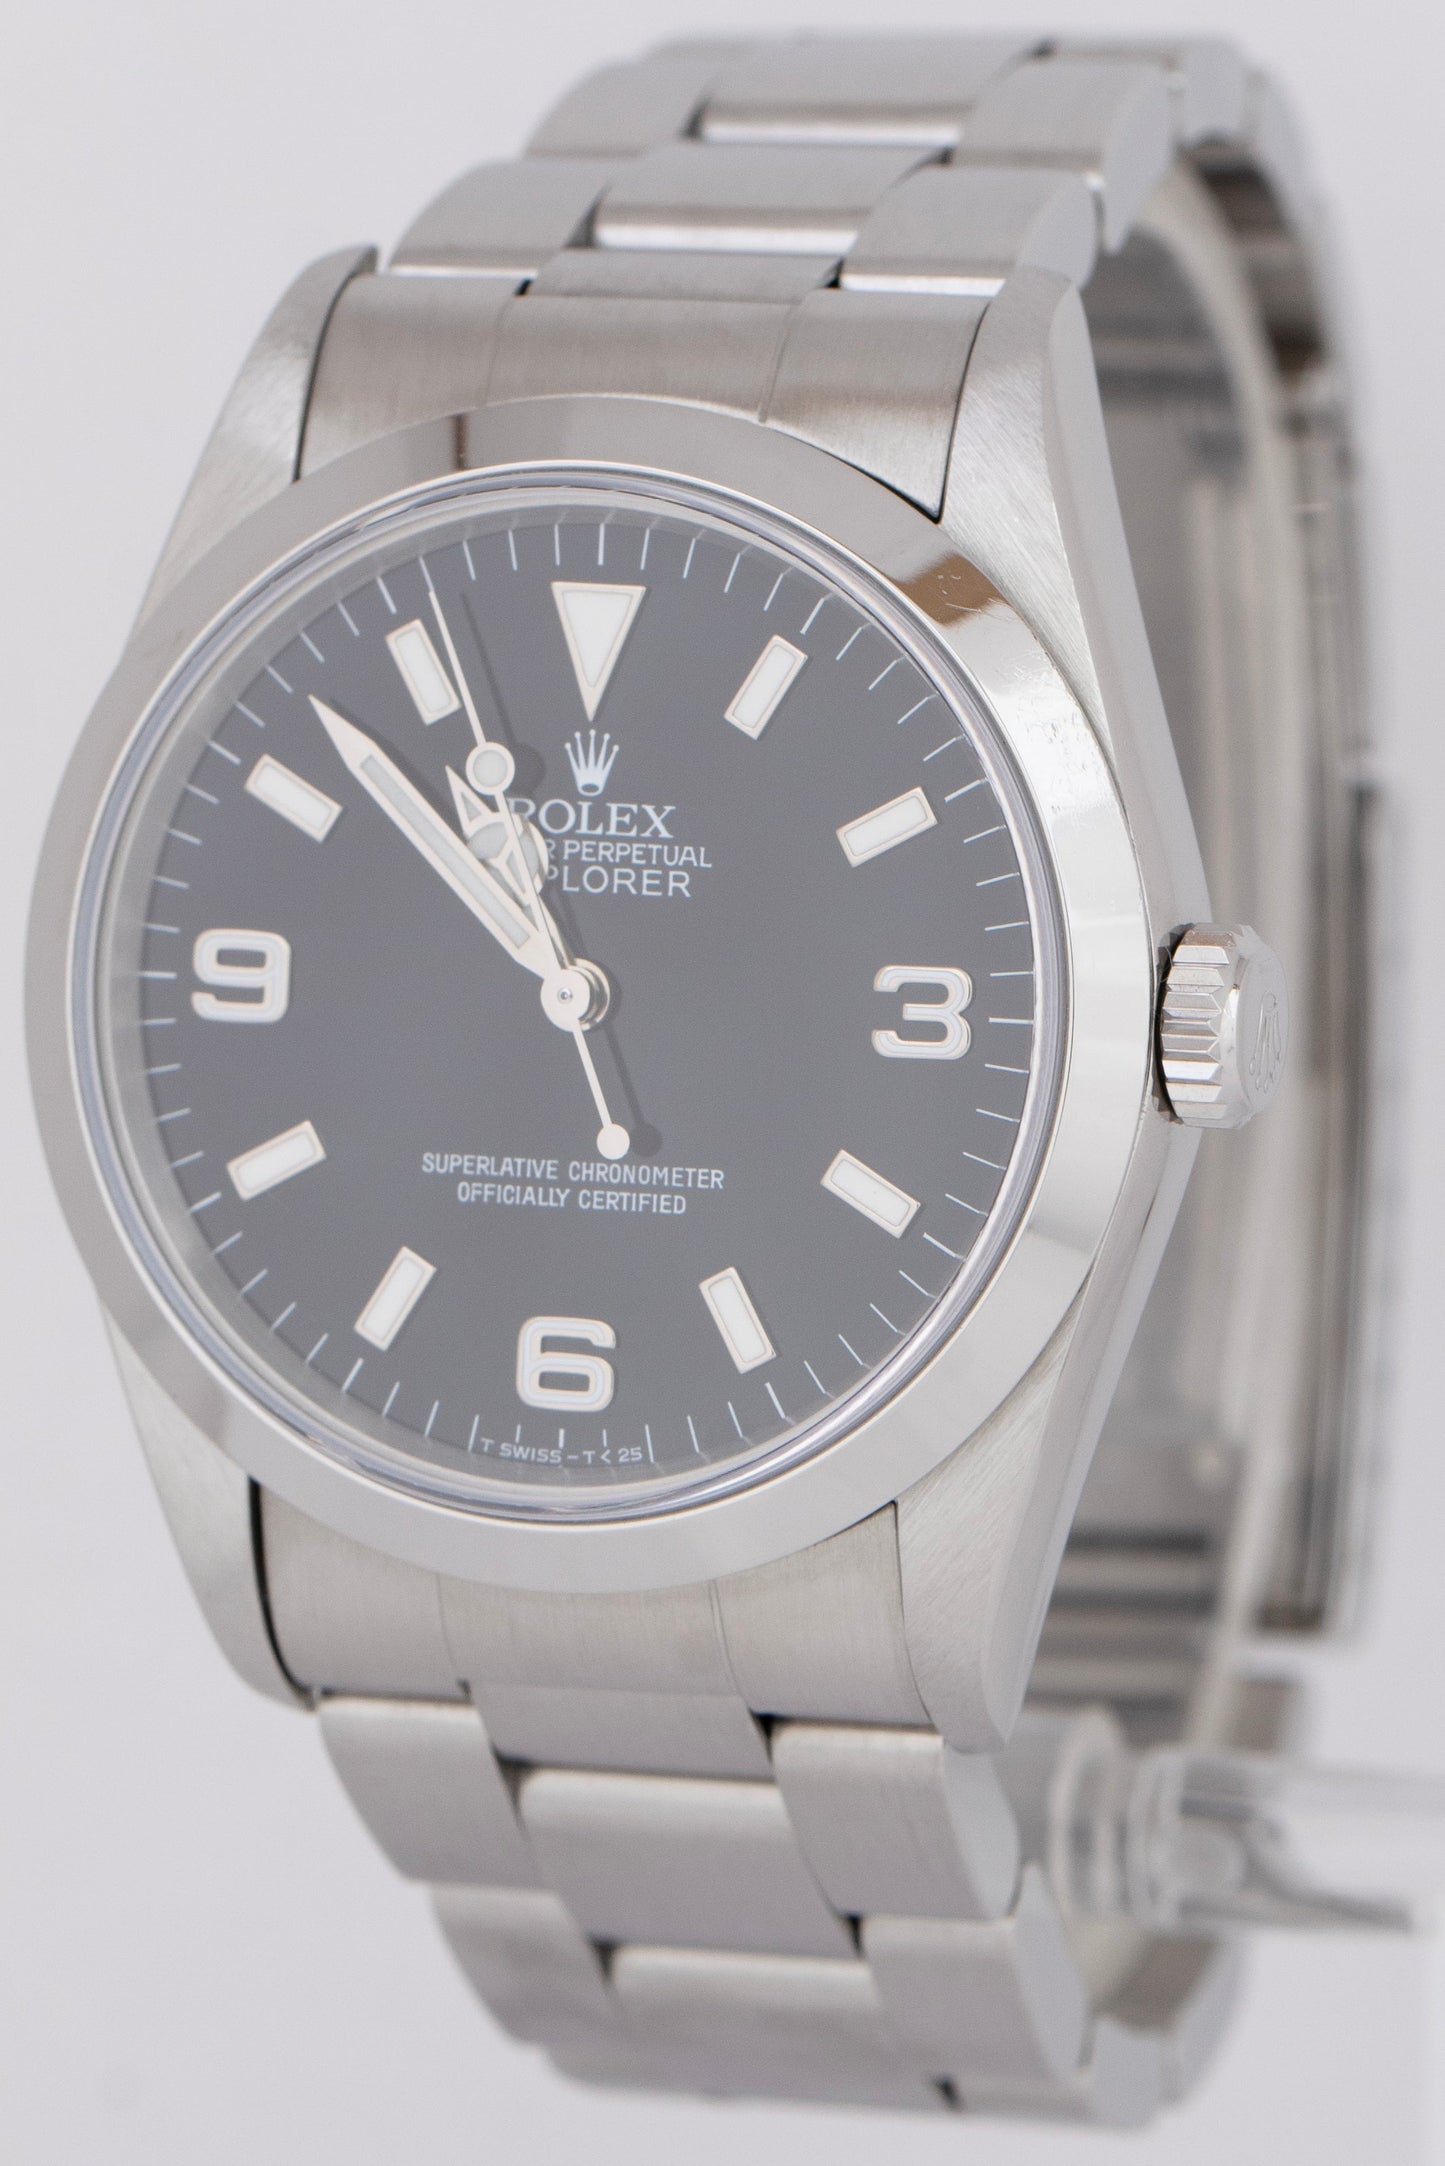 1996 PAPERS Rolex Explorer I Black 36mm Oyster Stainless Steel Watch 14270 B+P